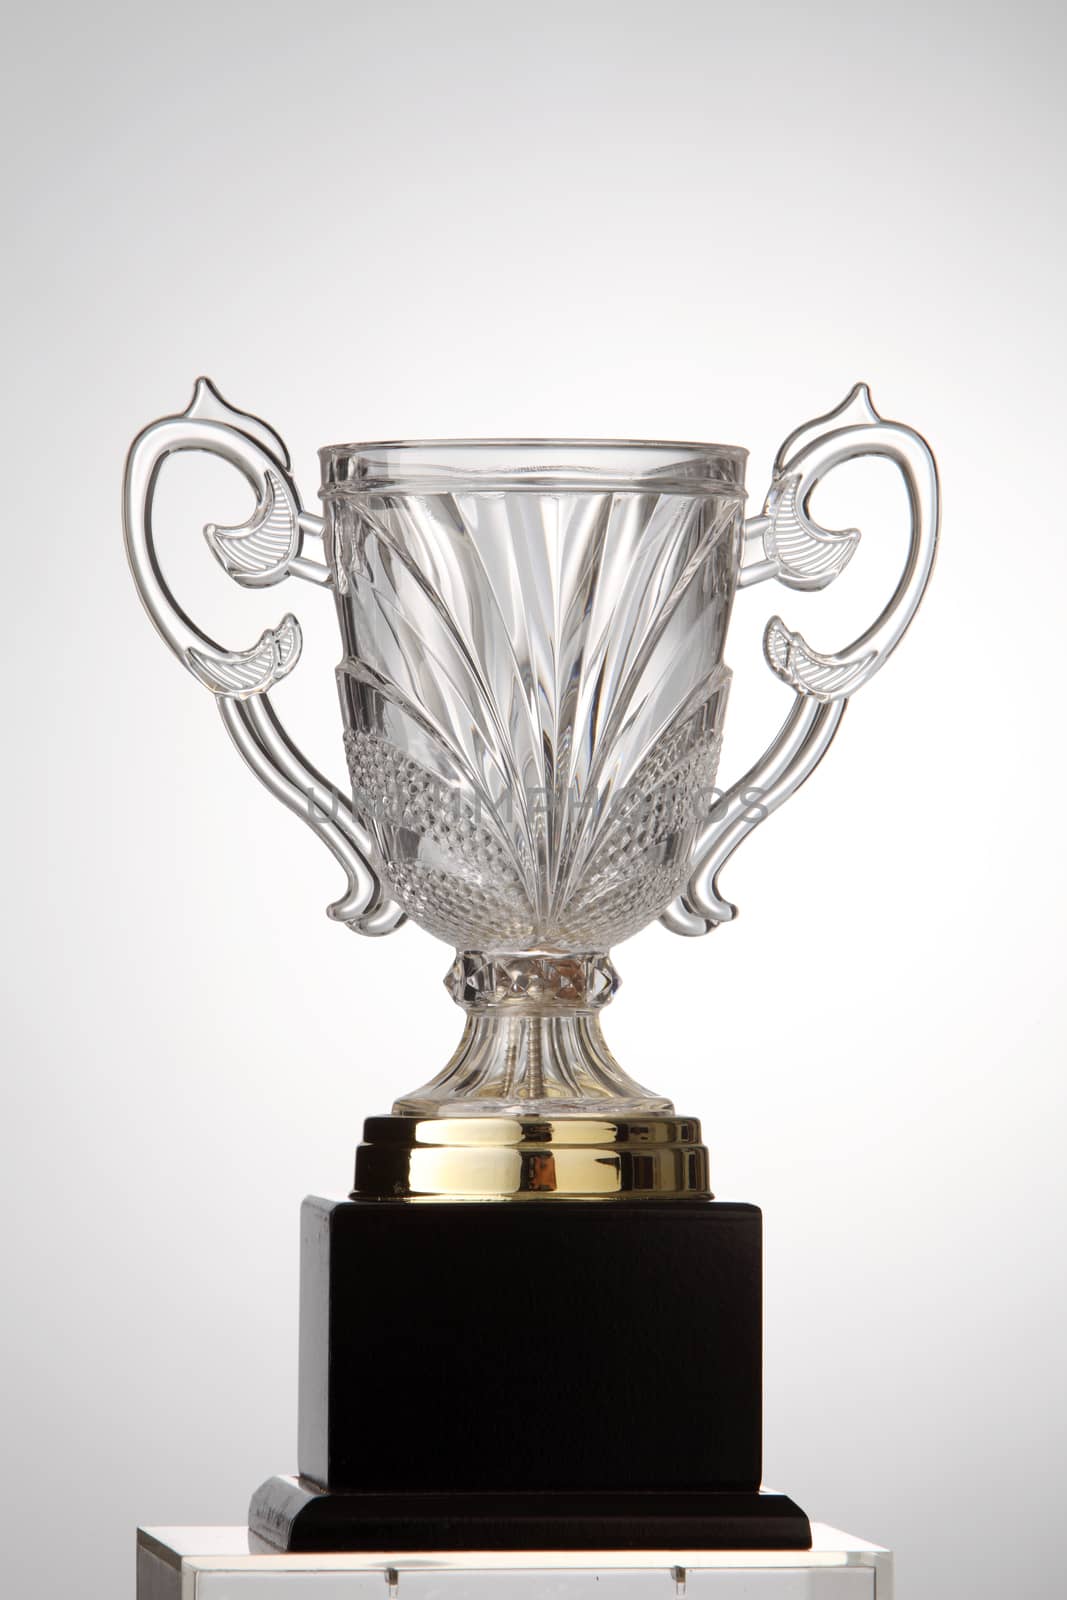 transperant trophy on the white background